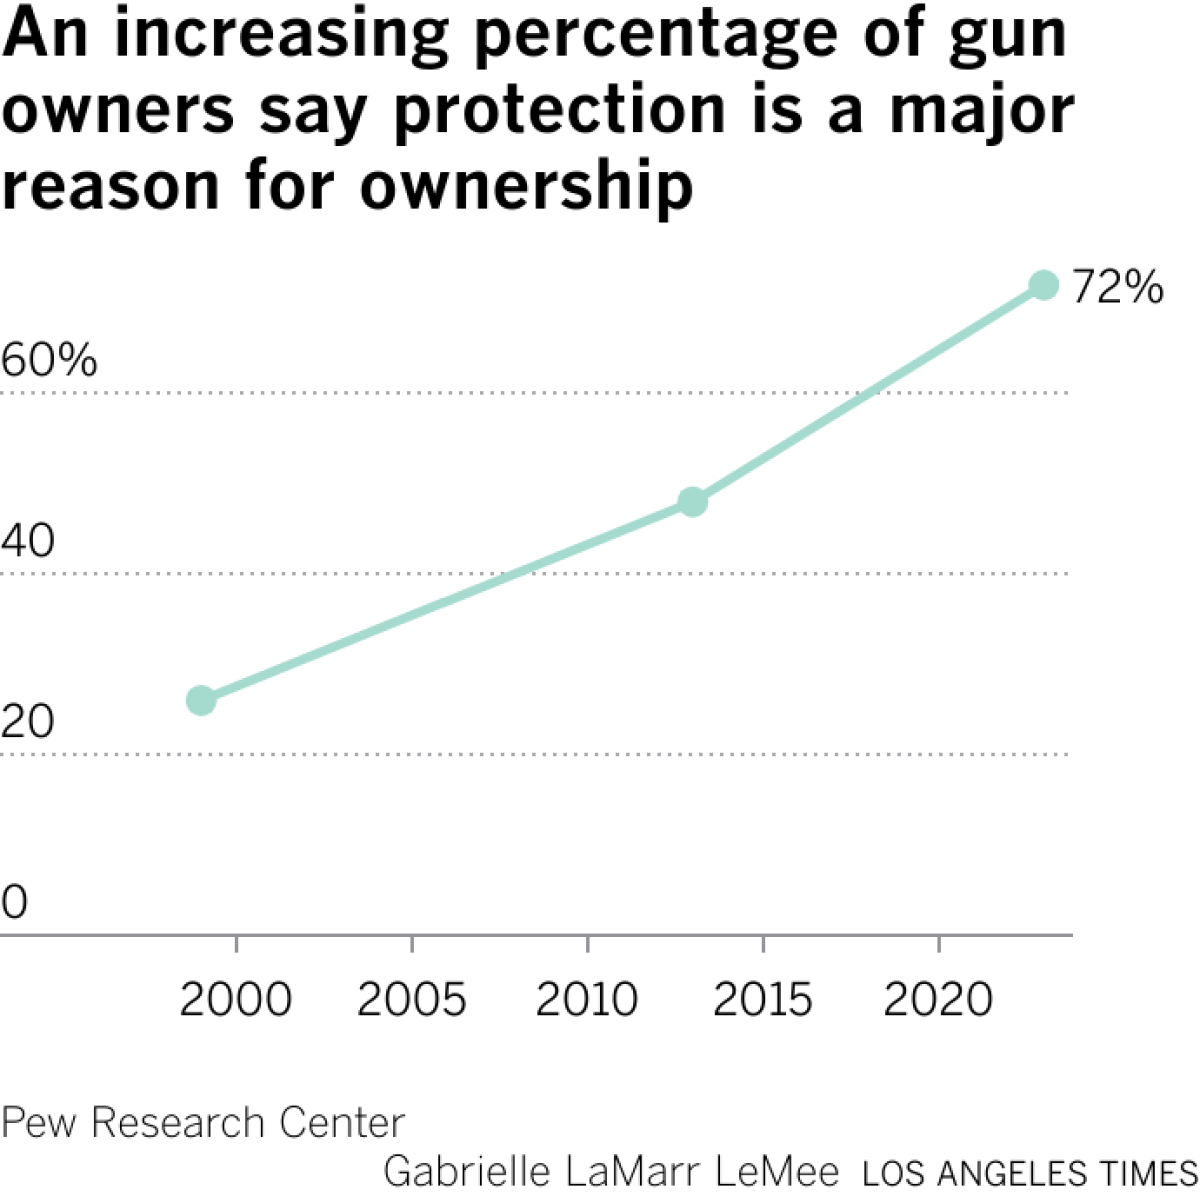 An increasing percentage of gun owners say protection is a major reason for ownership